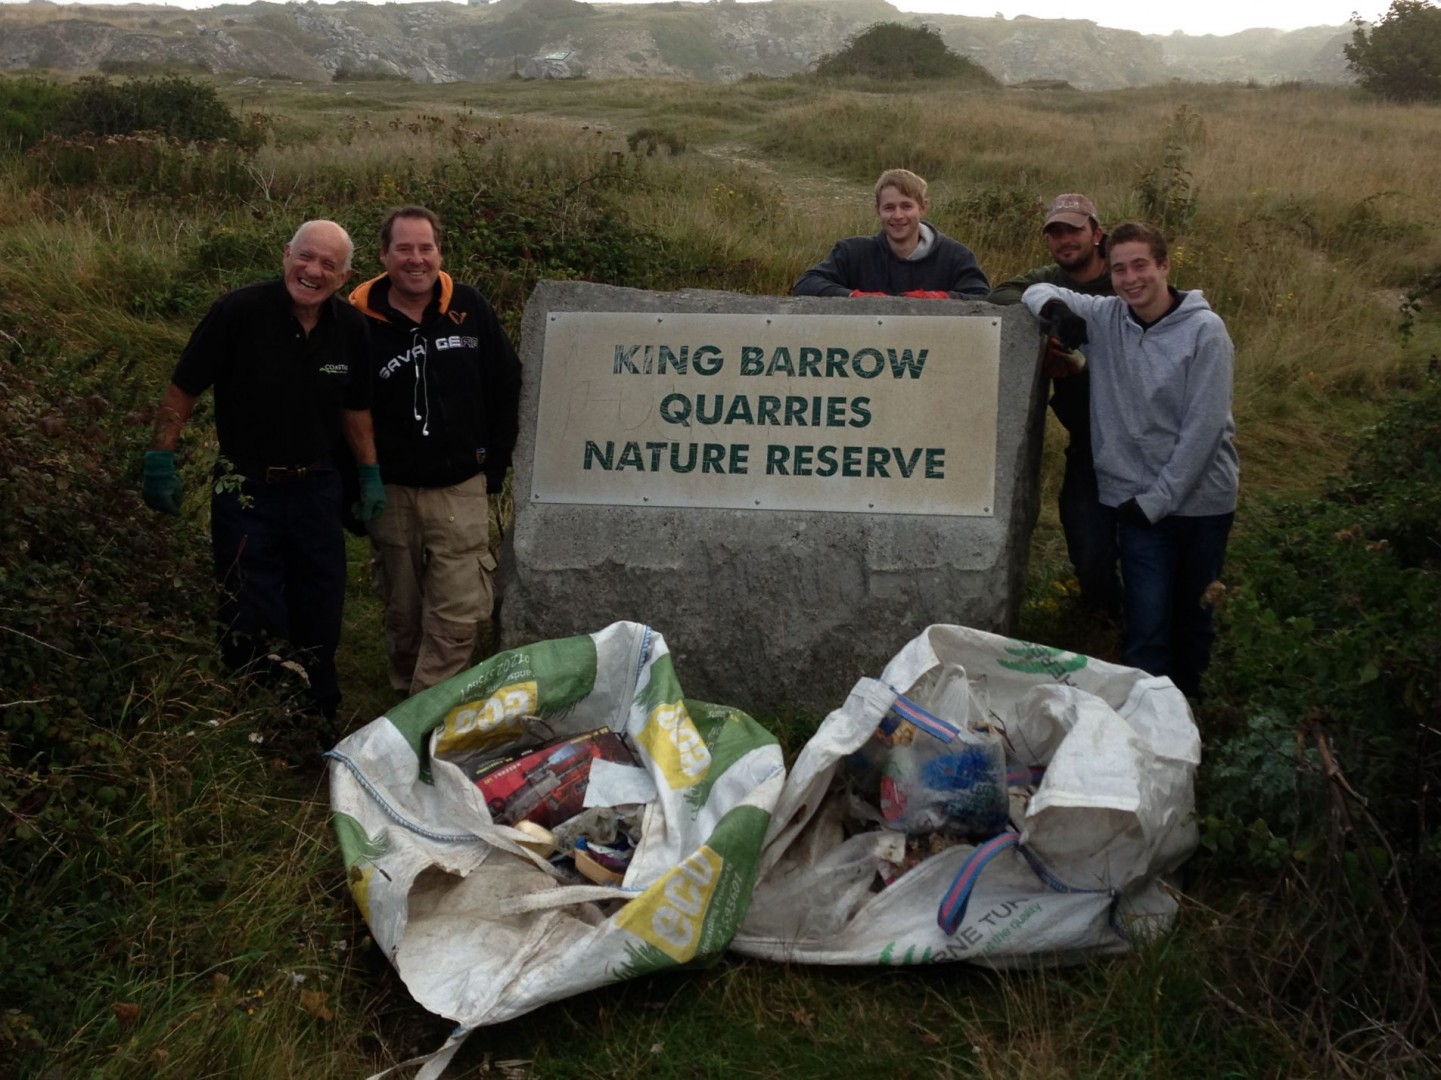 Litter collection at Kingbarrow